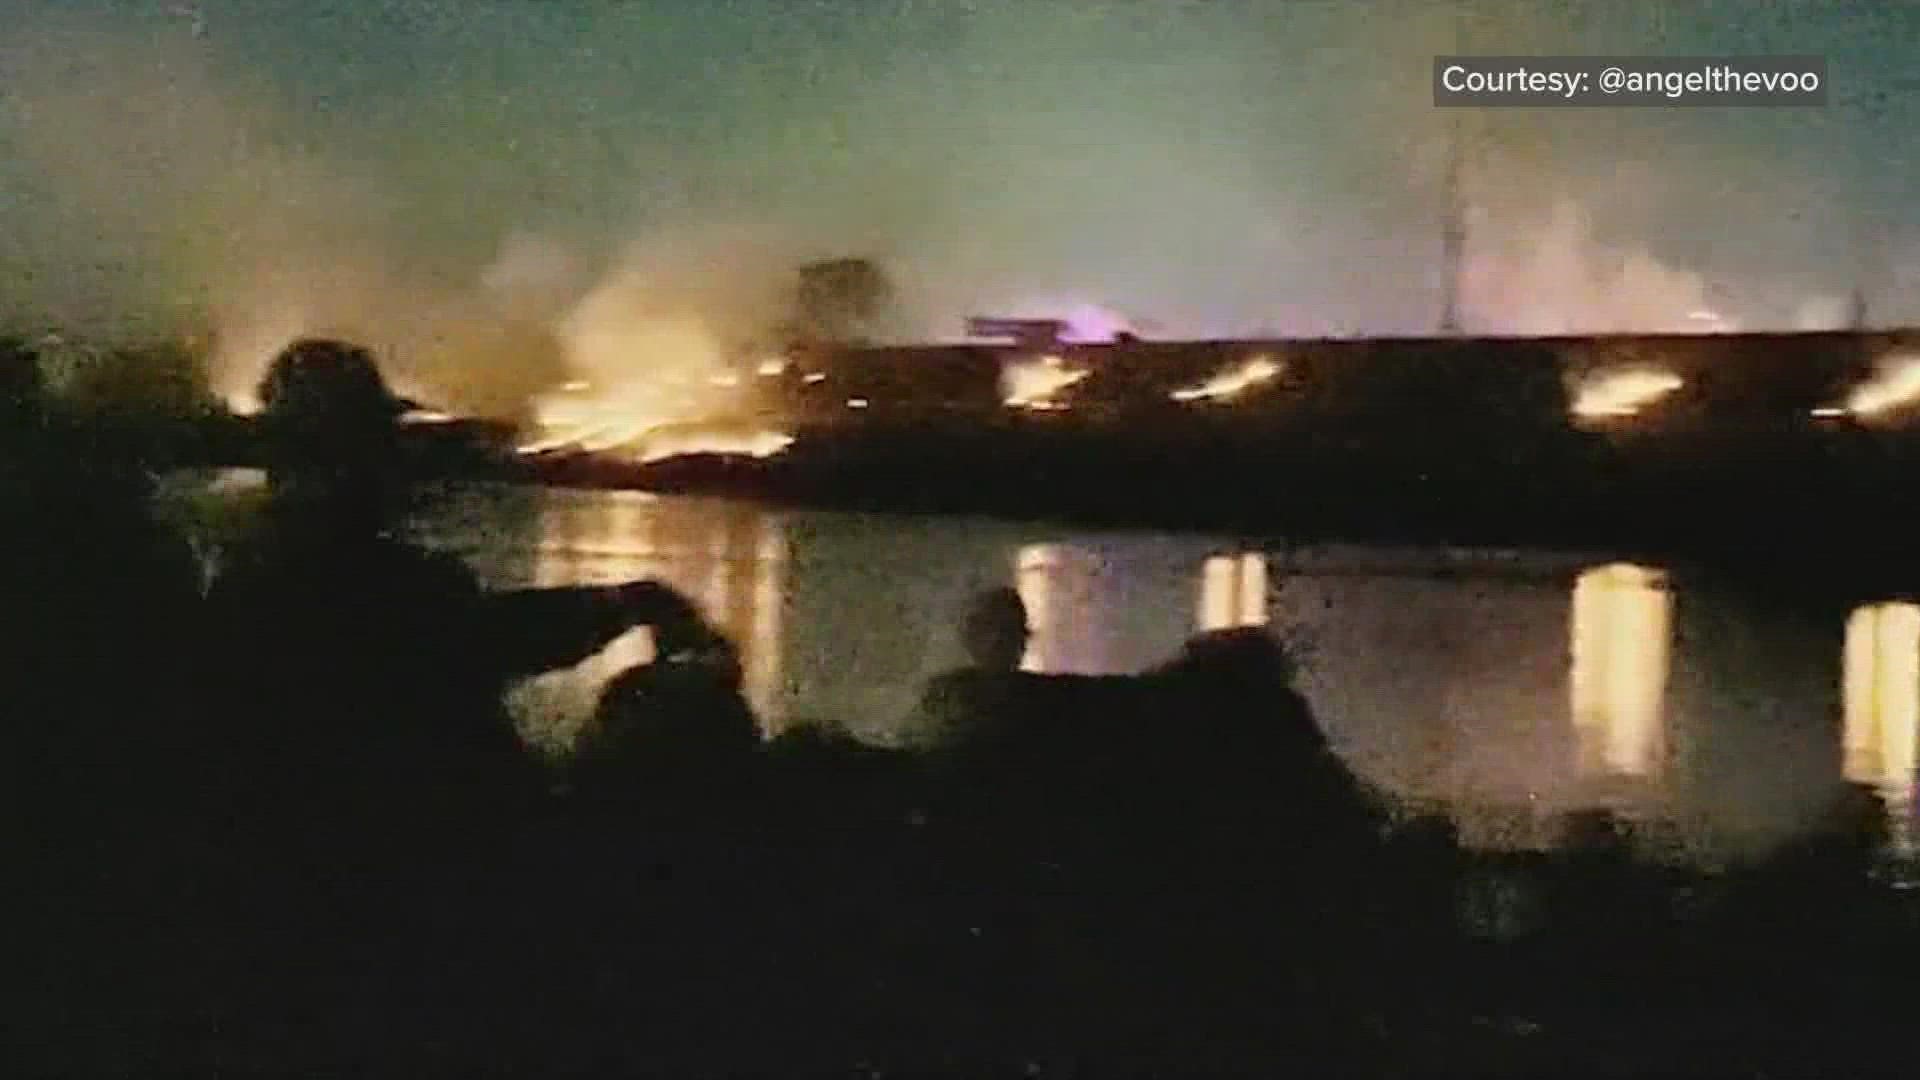 The Fort Worth fireworks show on the Trinity River was cut short due to a fire.